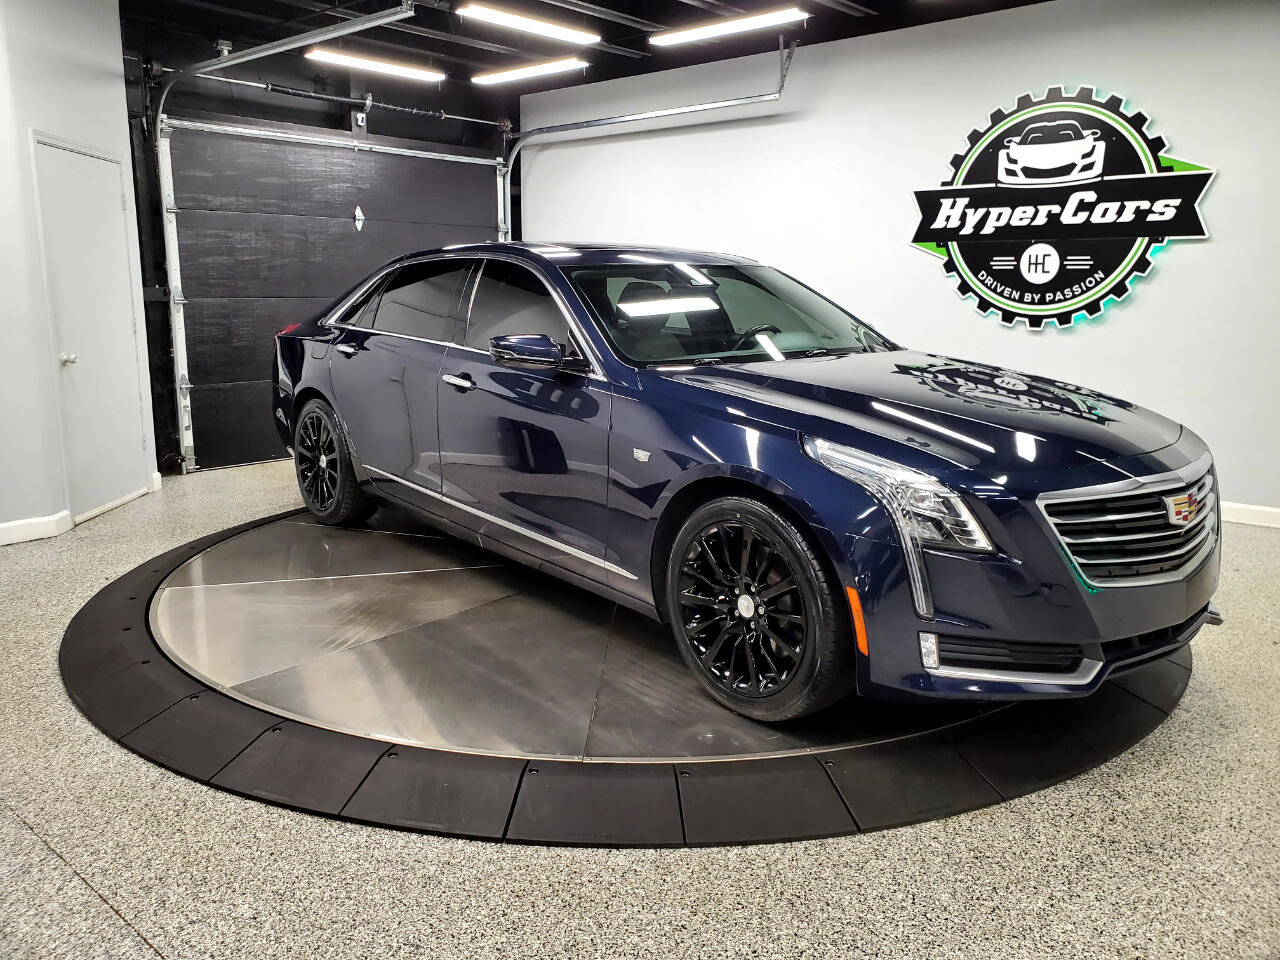 Used 2016 Cadillac CT6 Luxury AWD Dark Adriatic Blue Metallic for Sale in  New Albany, IN